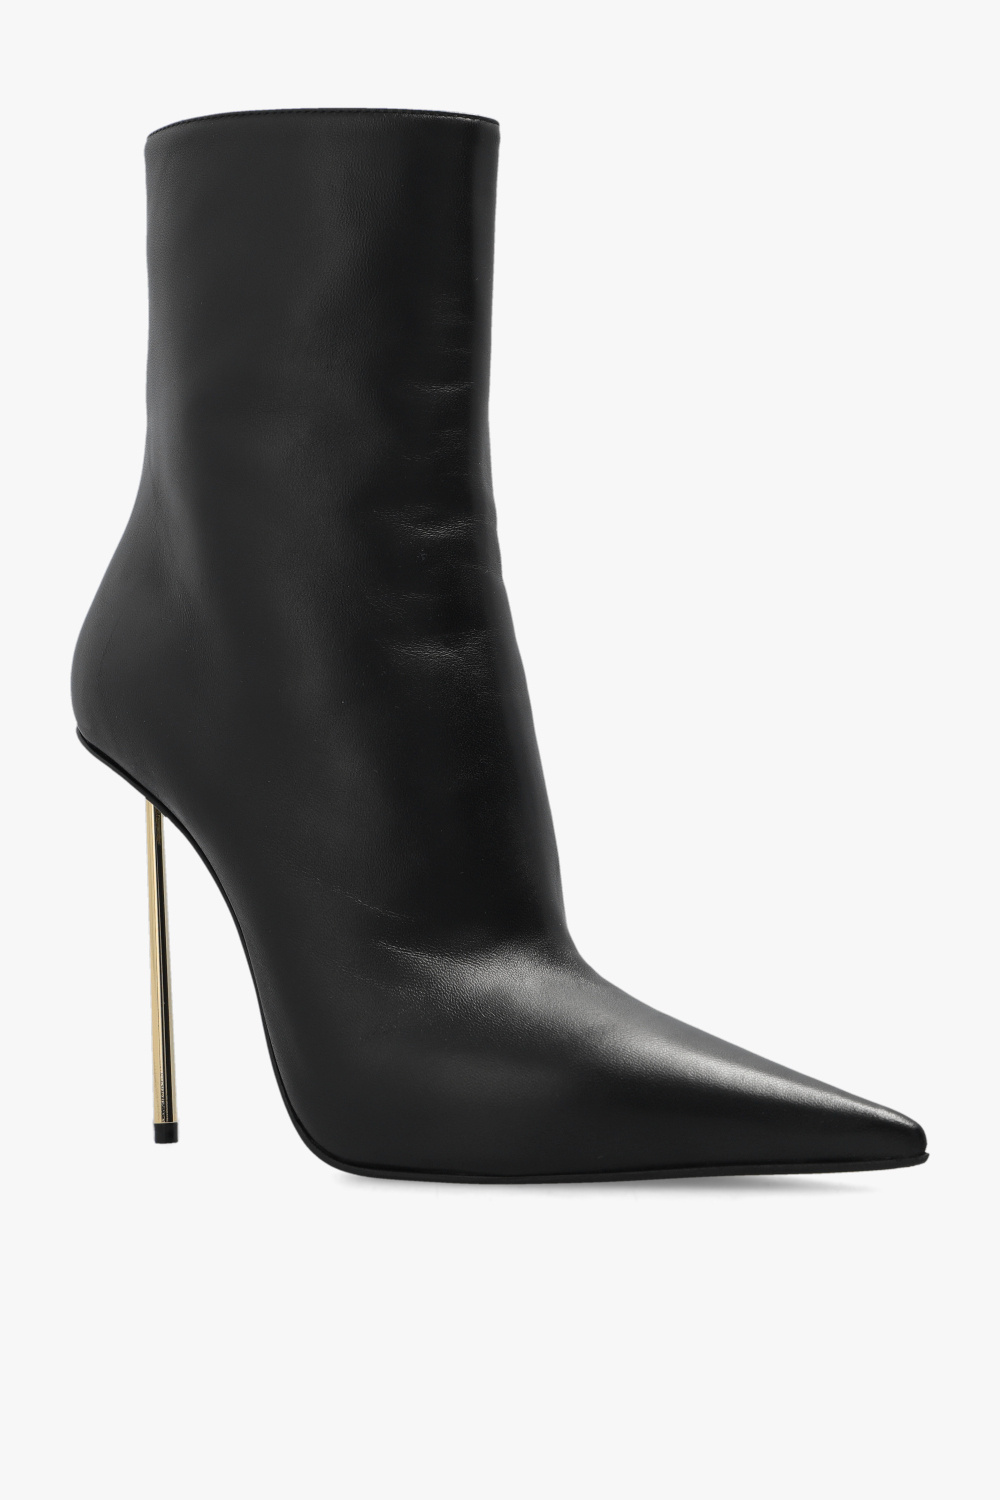 Le Silla ‘Bella’ heeled ankle boots